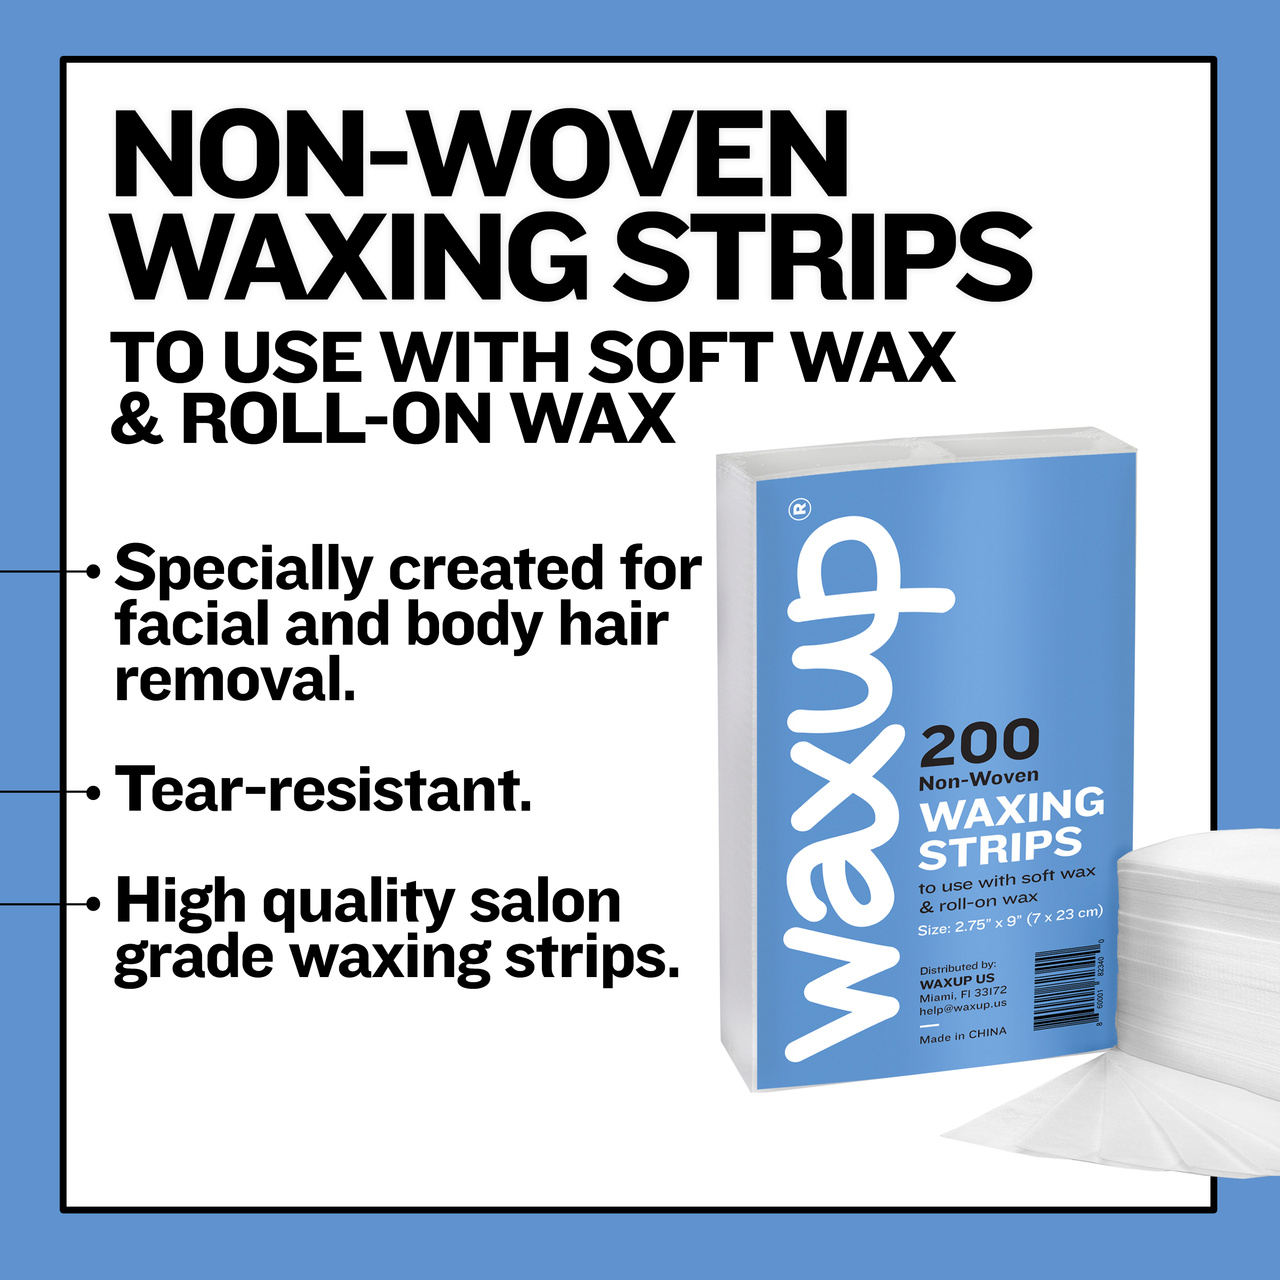 Non Woven Waxing Strips 3"x9" 200 Count - thatswaxup -  - Non Woven Waxing Strips - waxup hair removal wax body waxing kit women and men professional waxing supplies